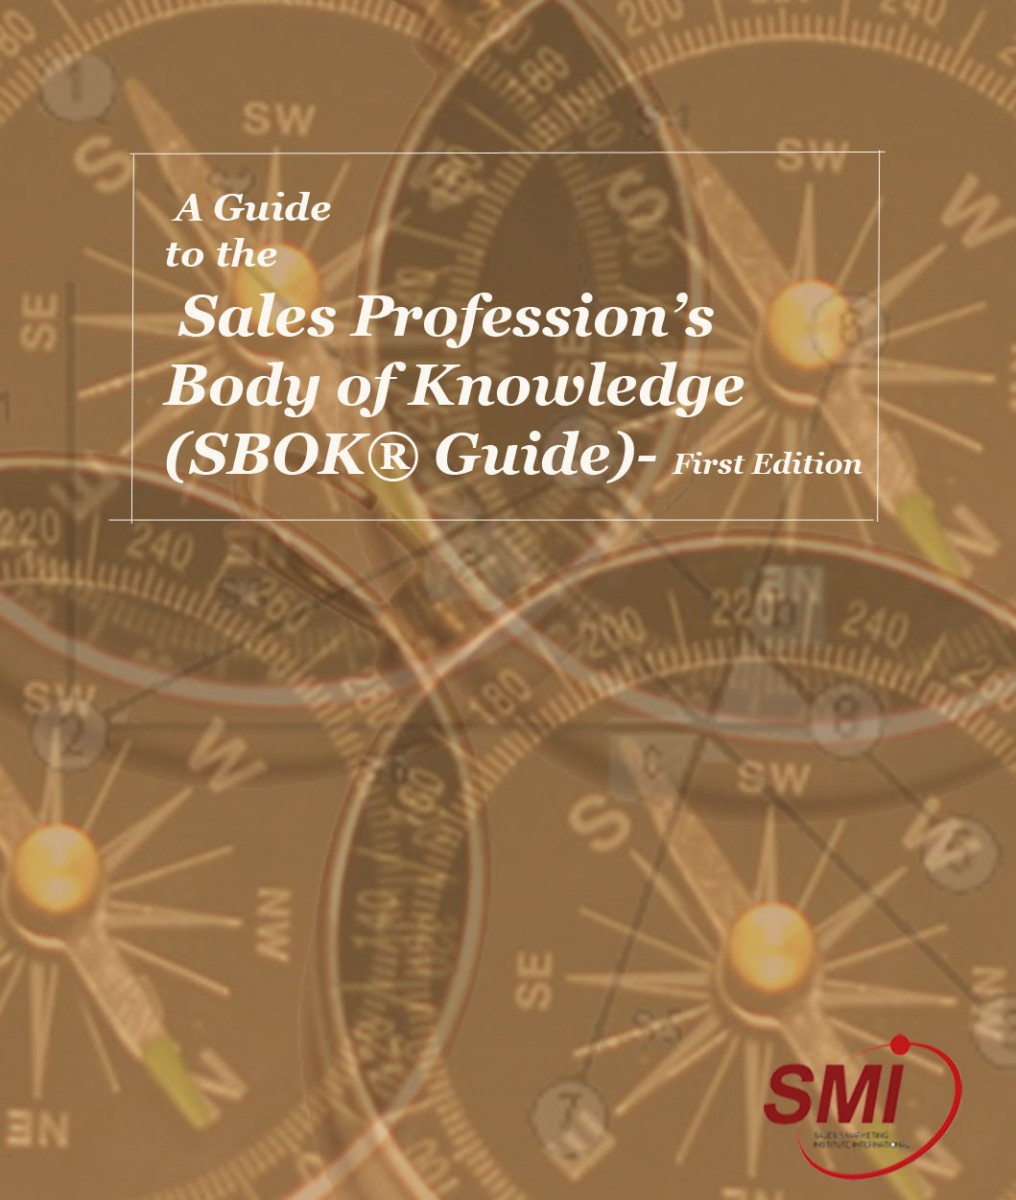 A Guide to the Sales Profession’s Body of Knowledge (SBOK® Guide)- First Edition